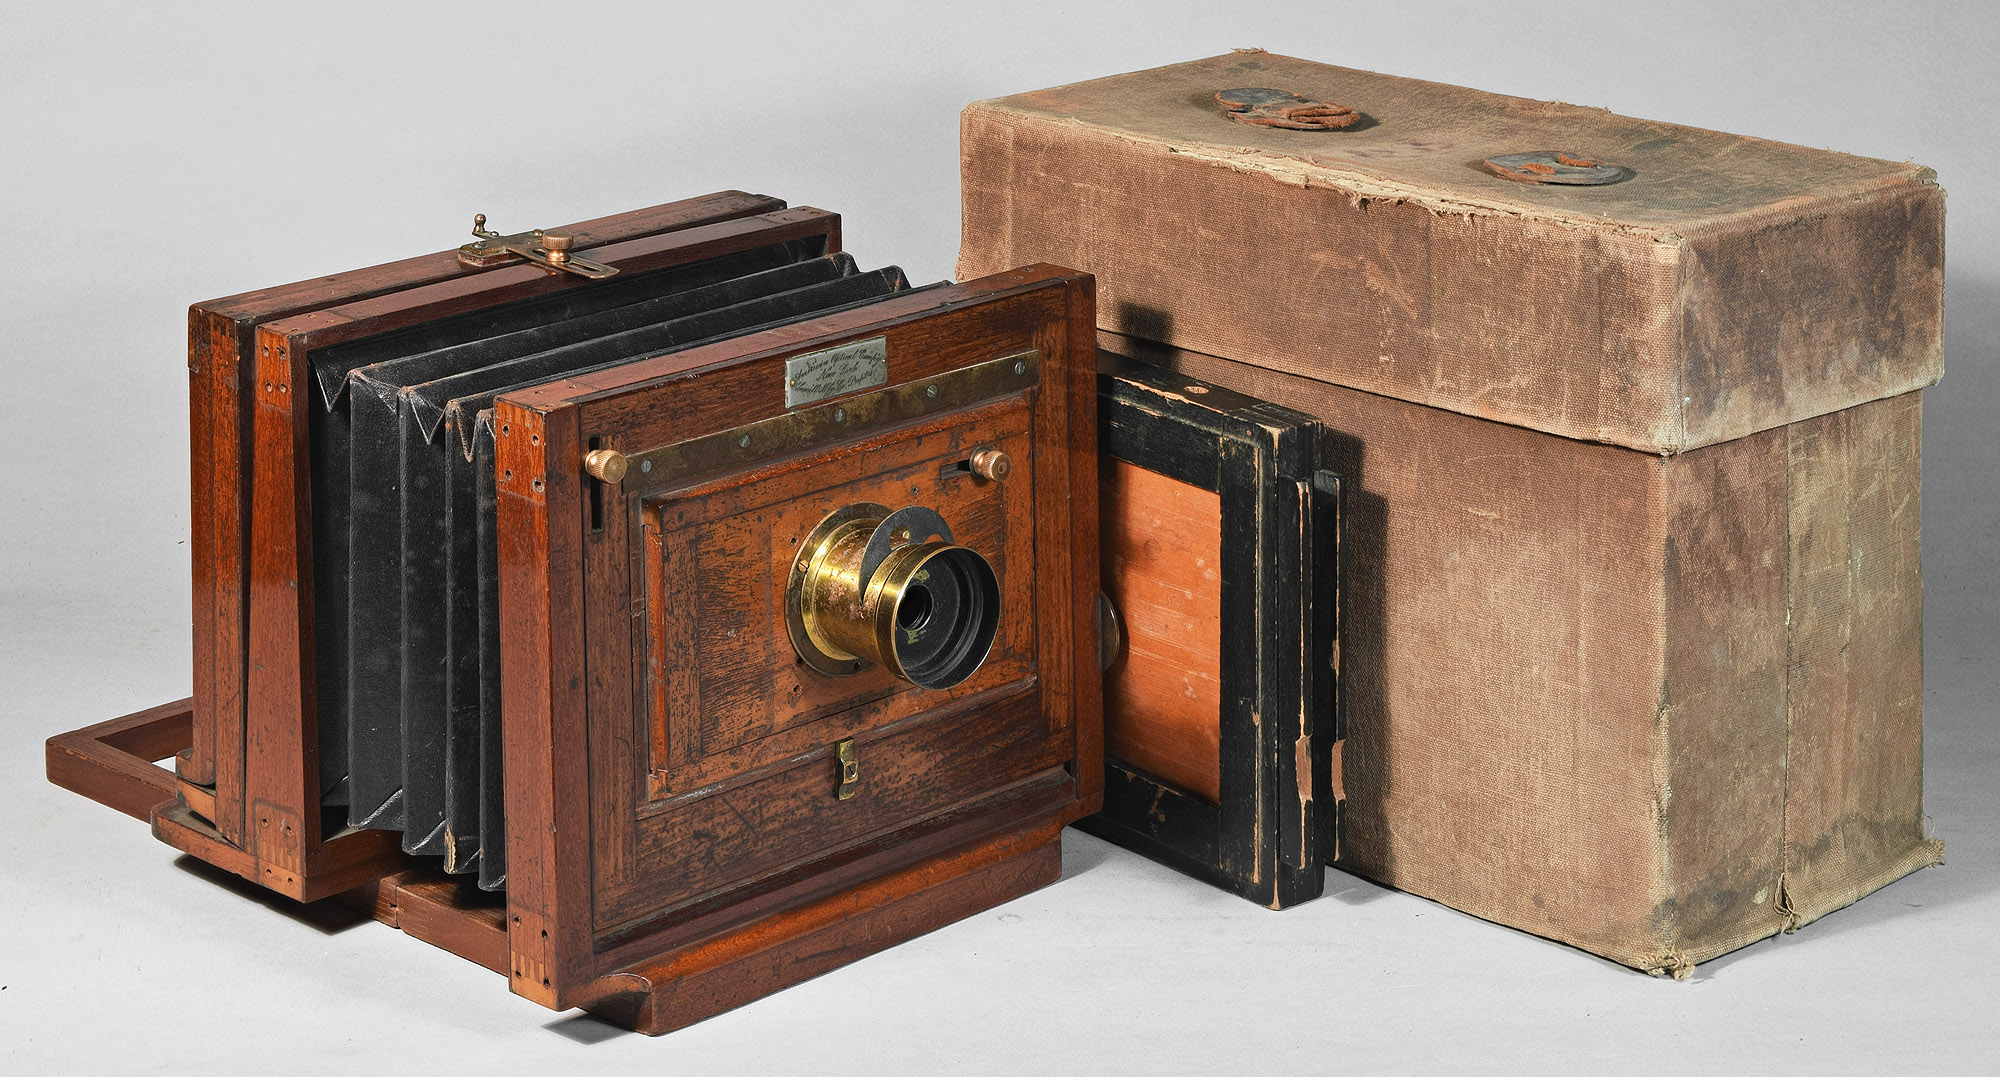 Image of a filed camera with case